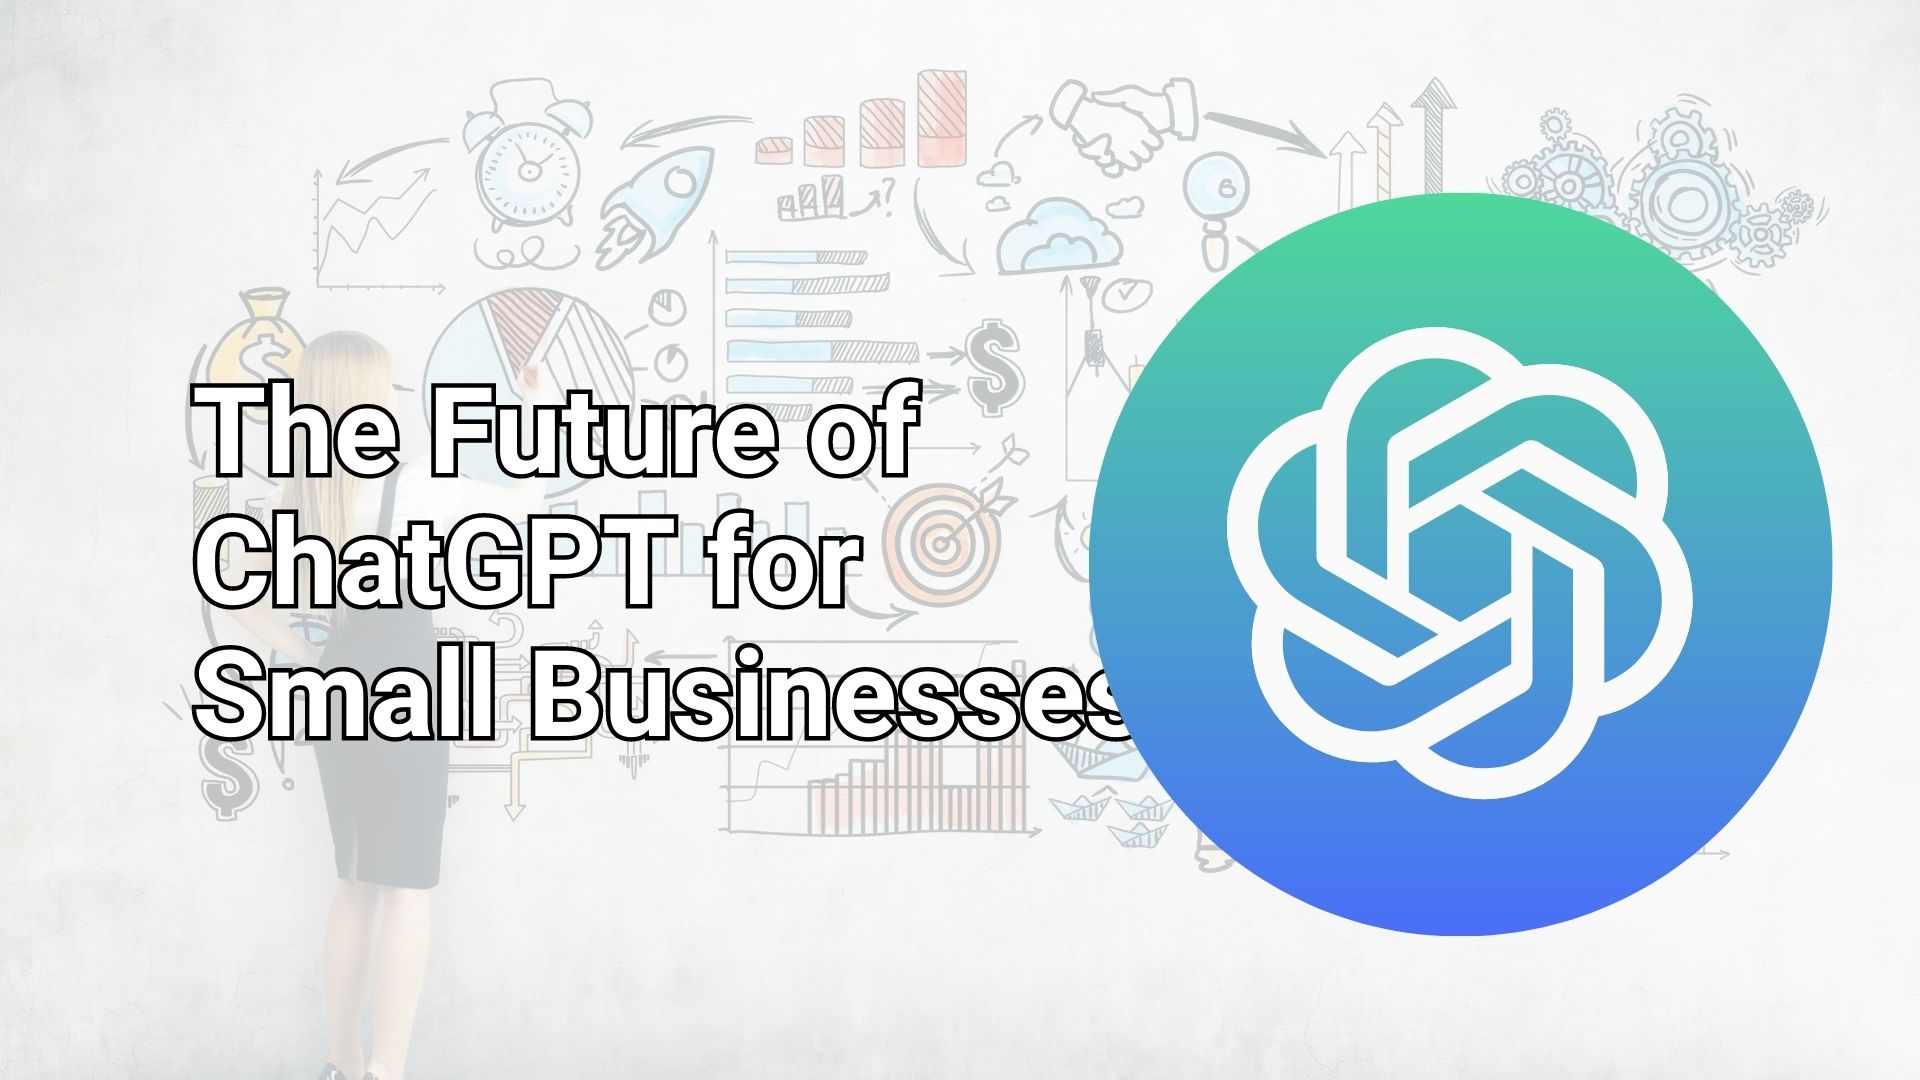 http://marketingelementsblog.com/2023/04/the-future-of-chatgpt-for-smbs/